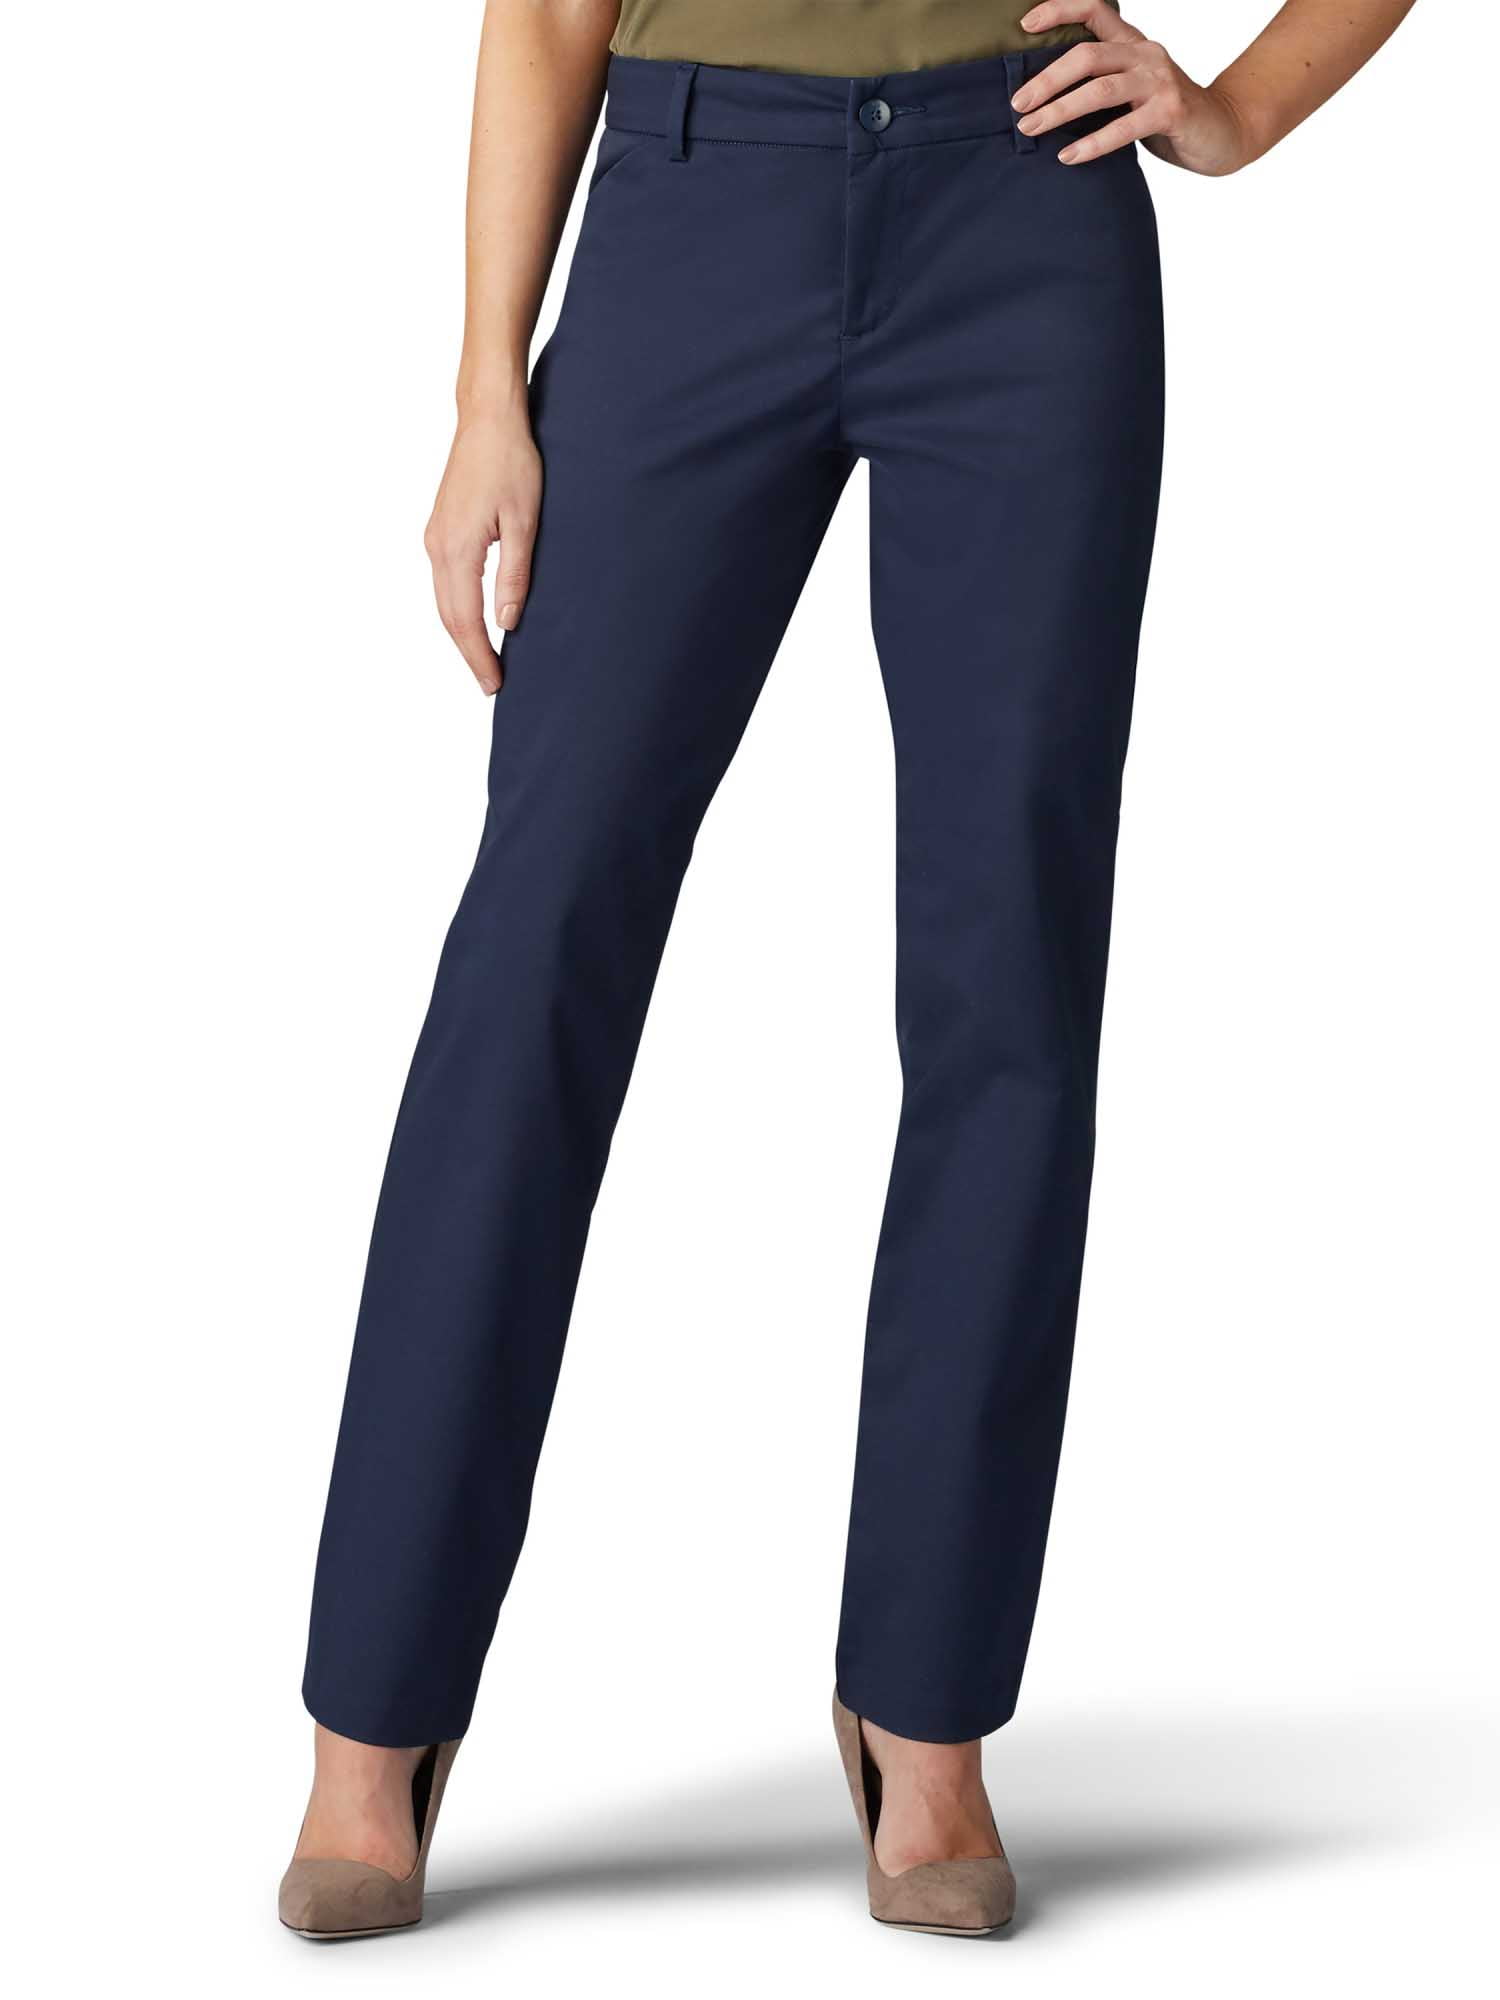 Buy LEE Womens Relaxed Fit All Day Straight Leg Pant Flax 8 at Amazonin